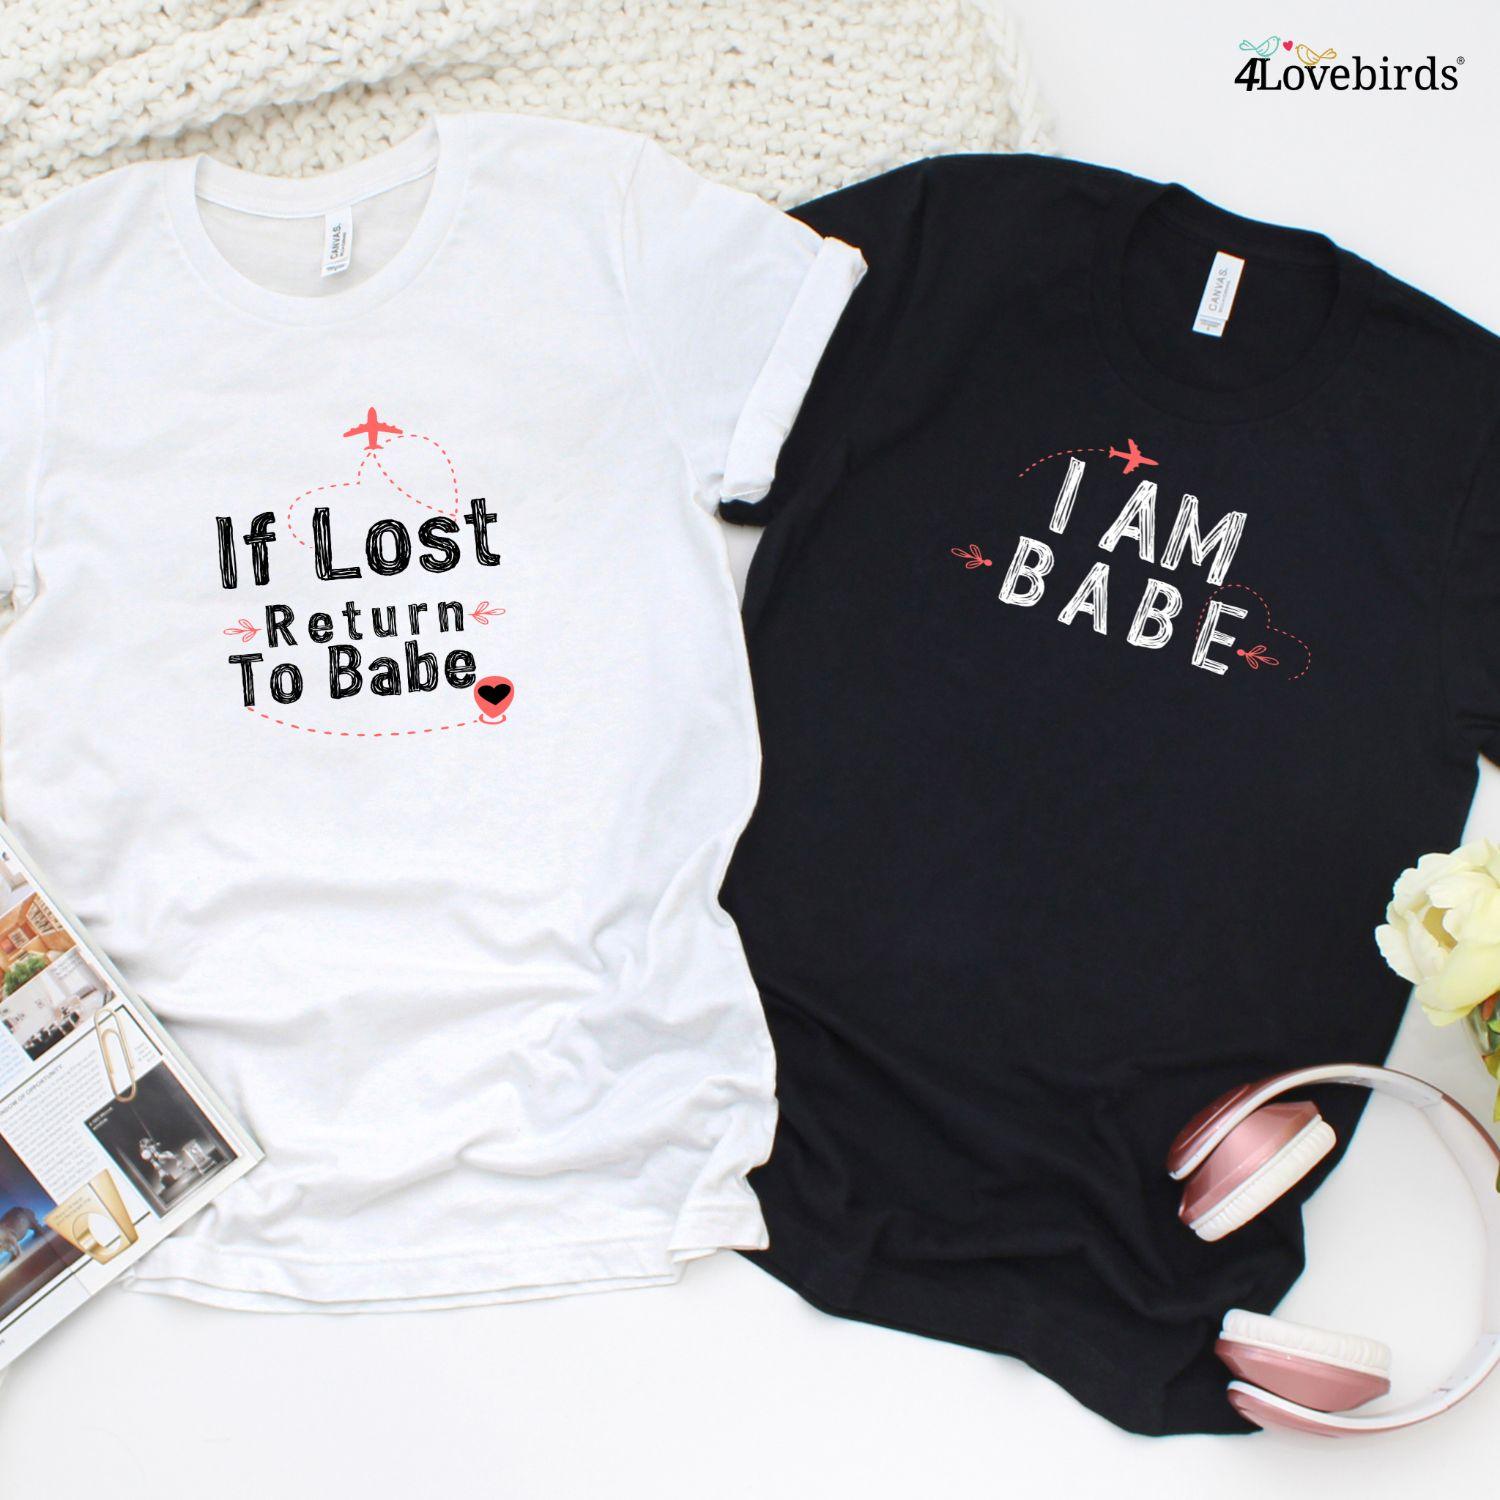 Valentines Matching Set: 'If Lost Return To Babe' Couple Outfits - 4Lovebirds